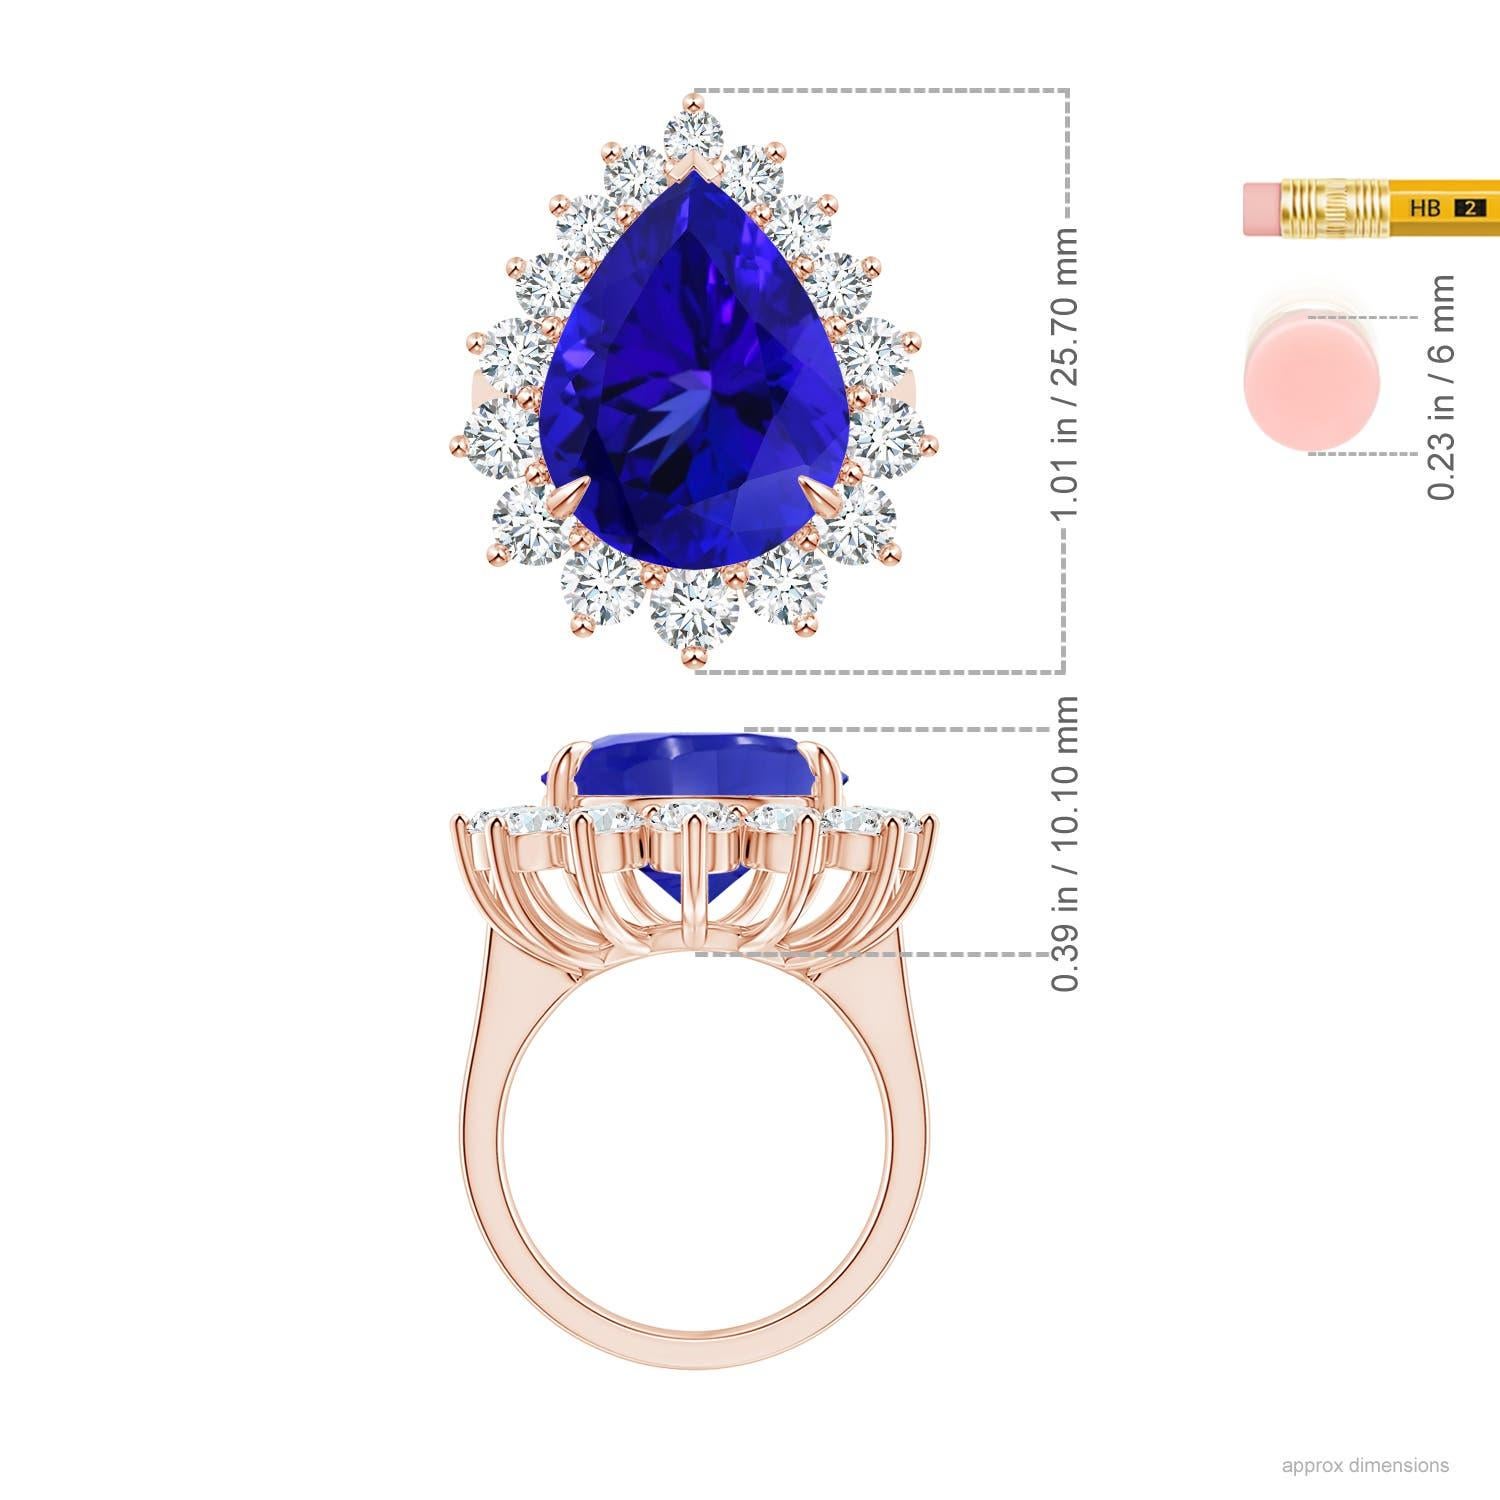 For Sale:  GIA Certified Natural Tanzanite Ring in Rose Gold with Diamond Halo 5